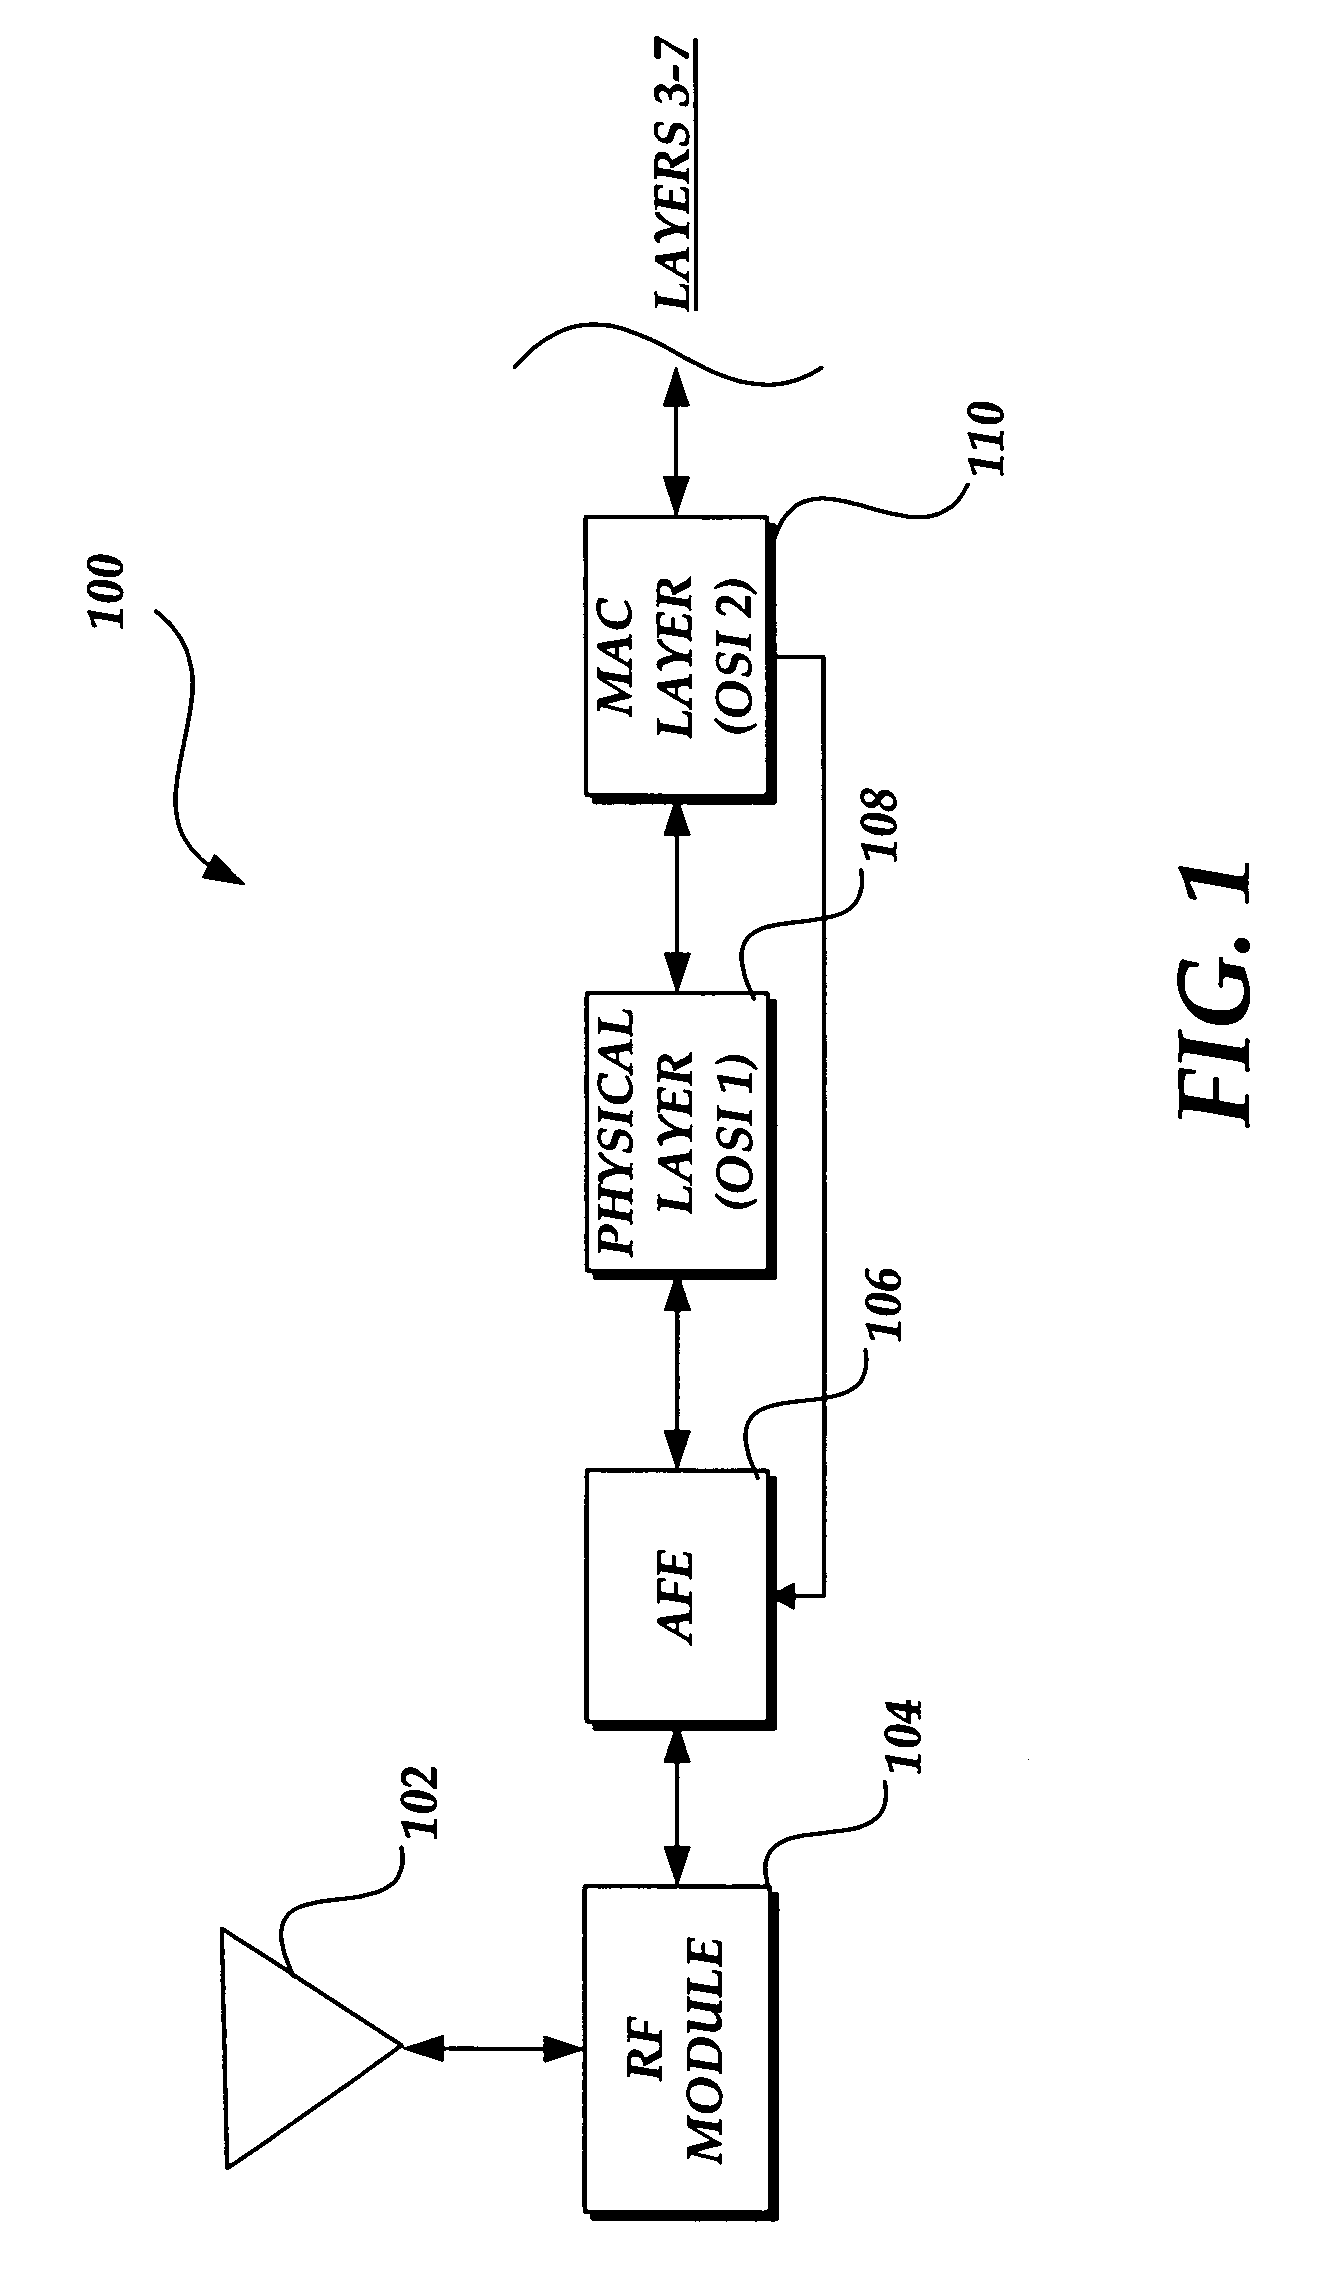 Pipelined analog to digital converter that is configurable based on mode and strength of received signal